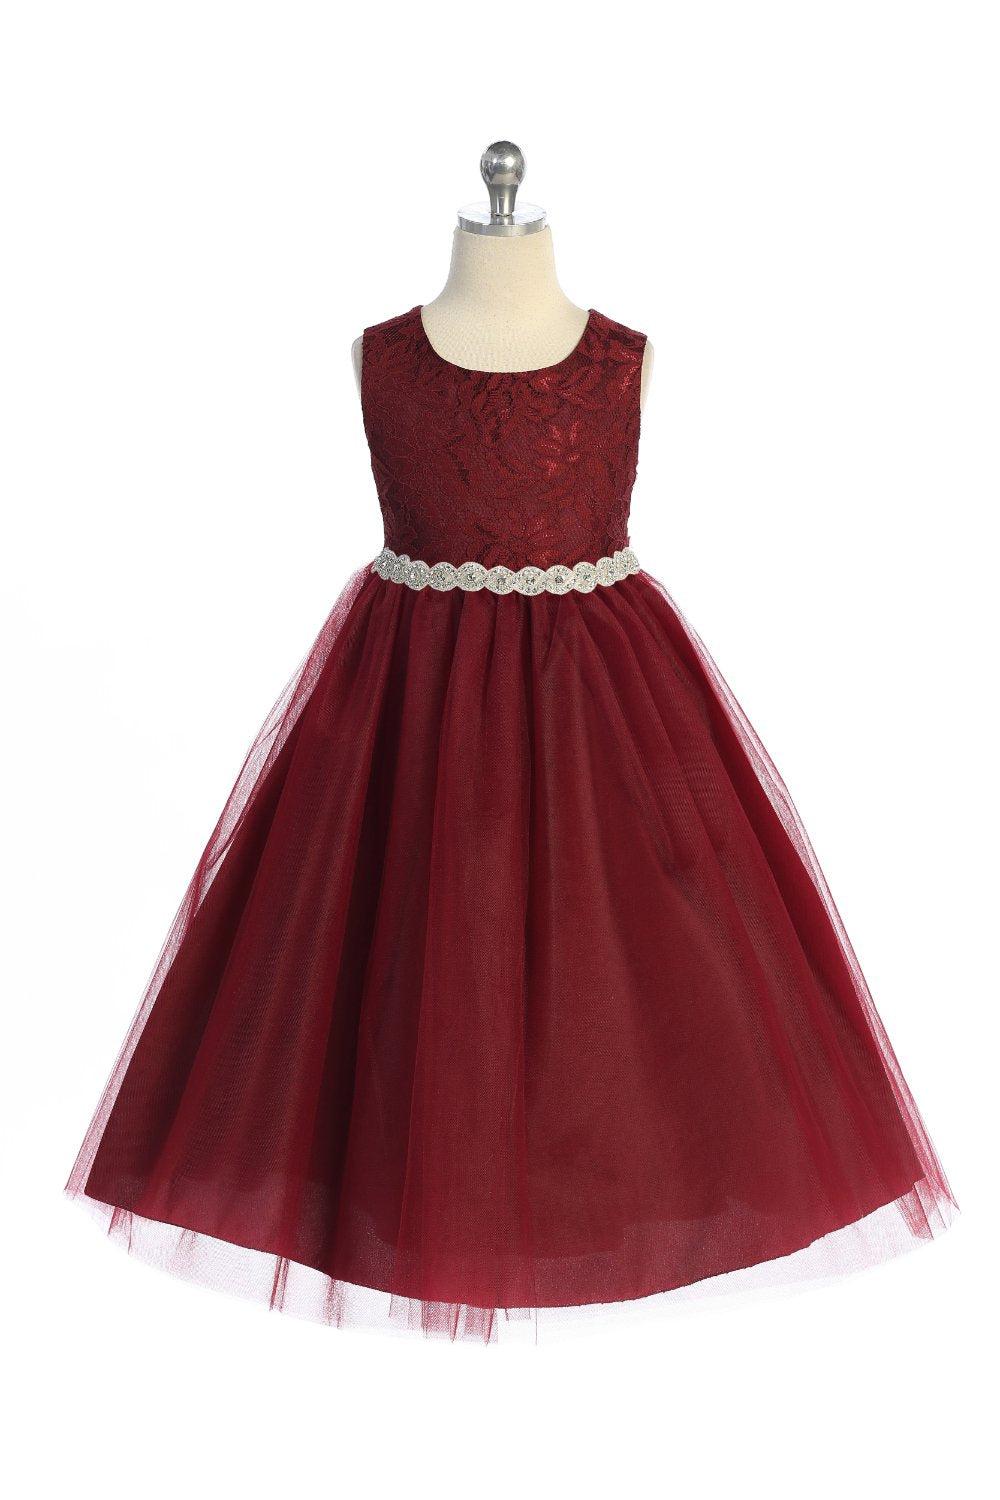 Long Lace Illusion with Rhinestone Trim Girl Party Dress by AS524-A Kids Dream - Girl Formal Dresses